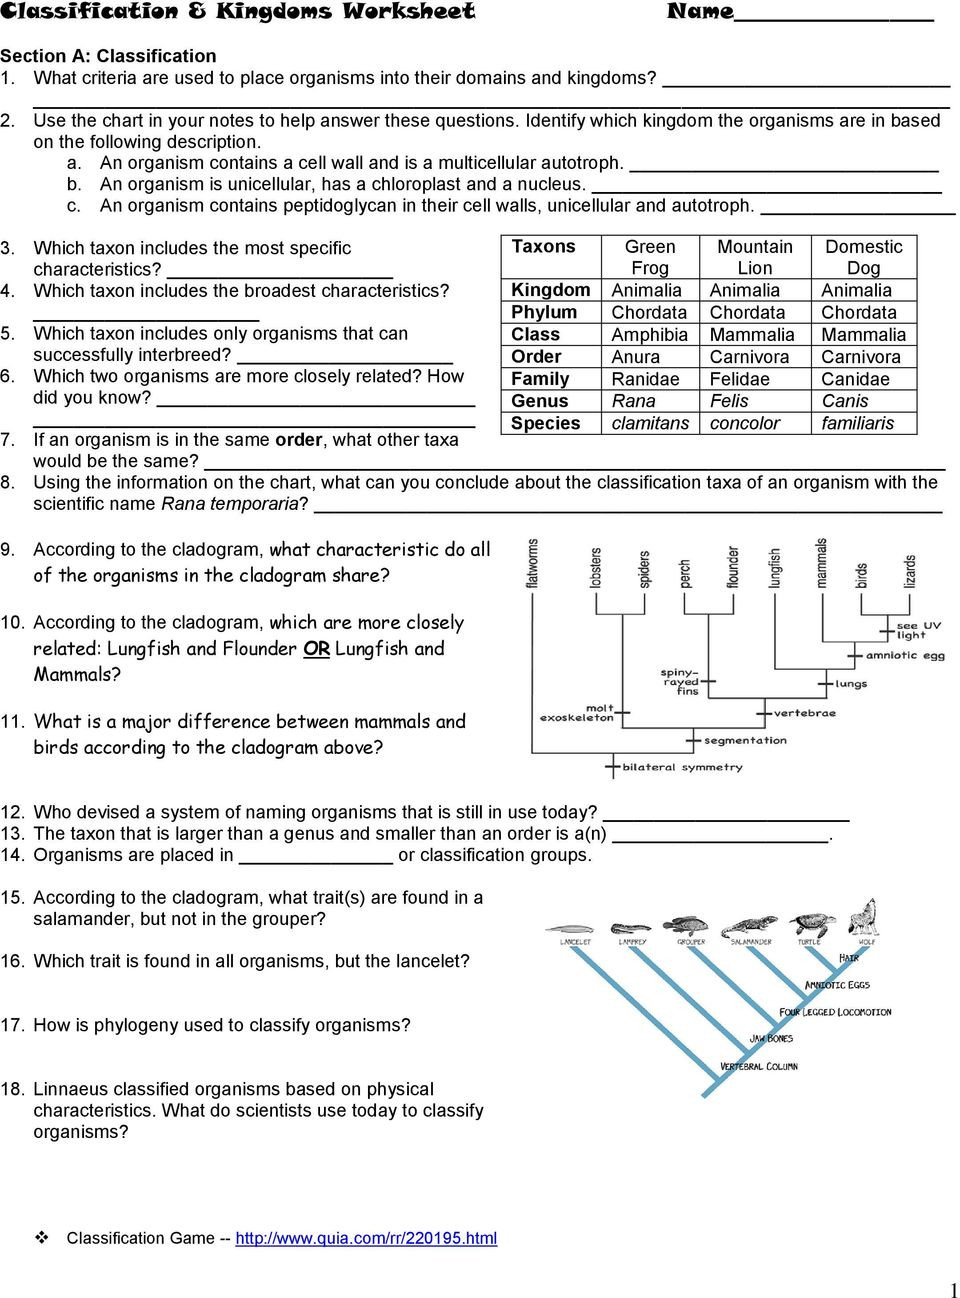 Biological Classification Worksheet Answers Classification &amp; Kingdoms Worksheet Pdf Free Download